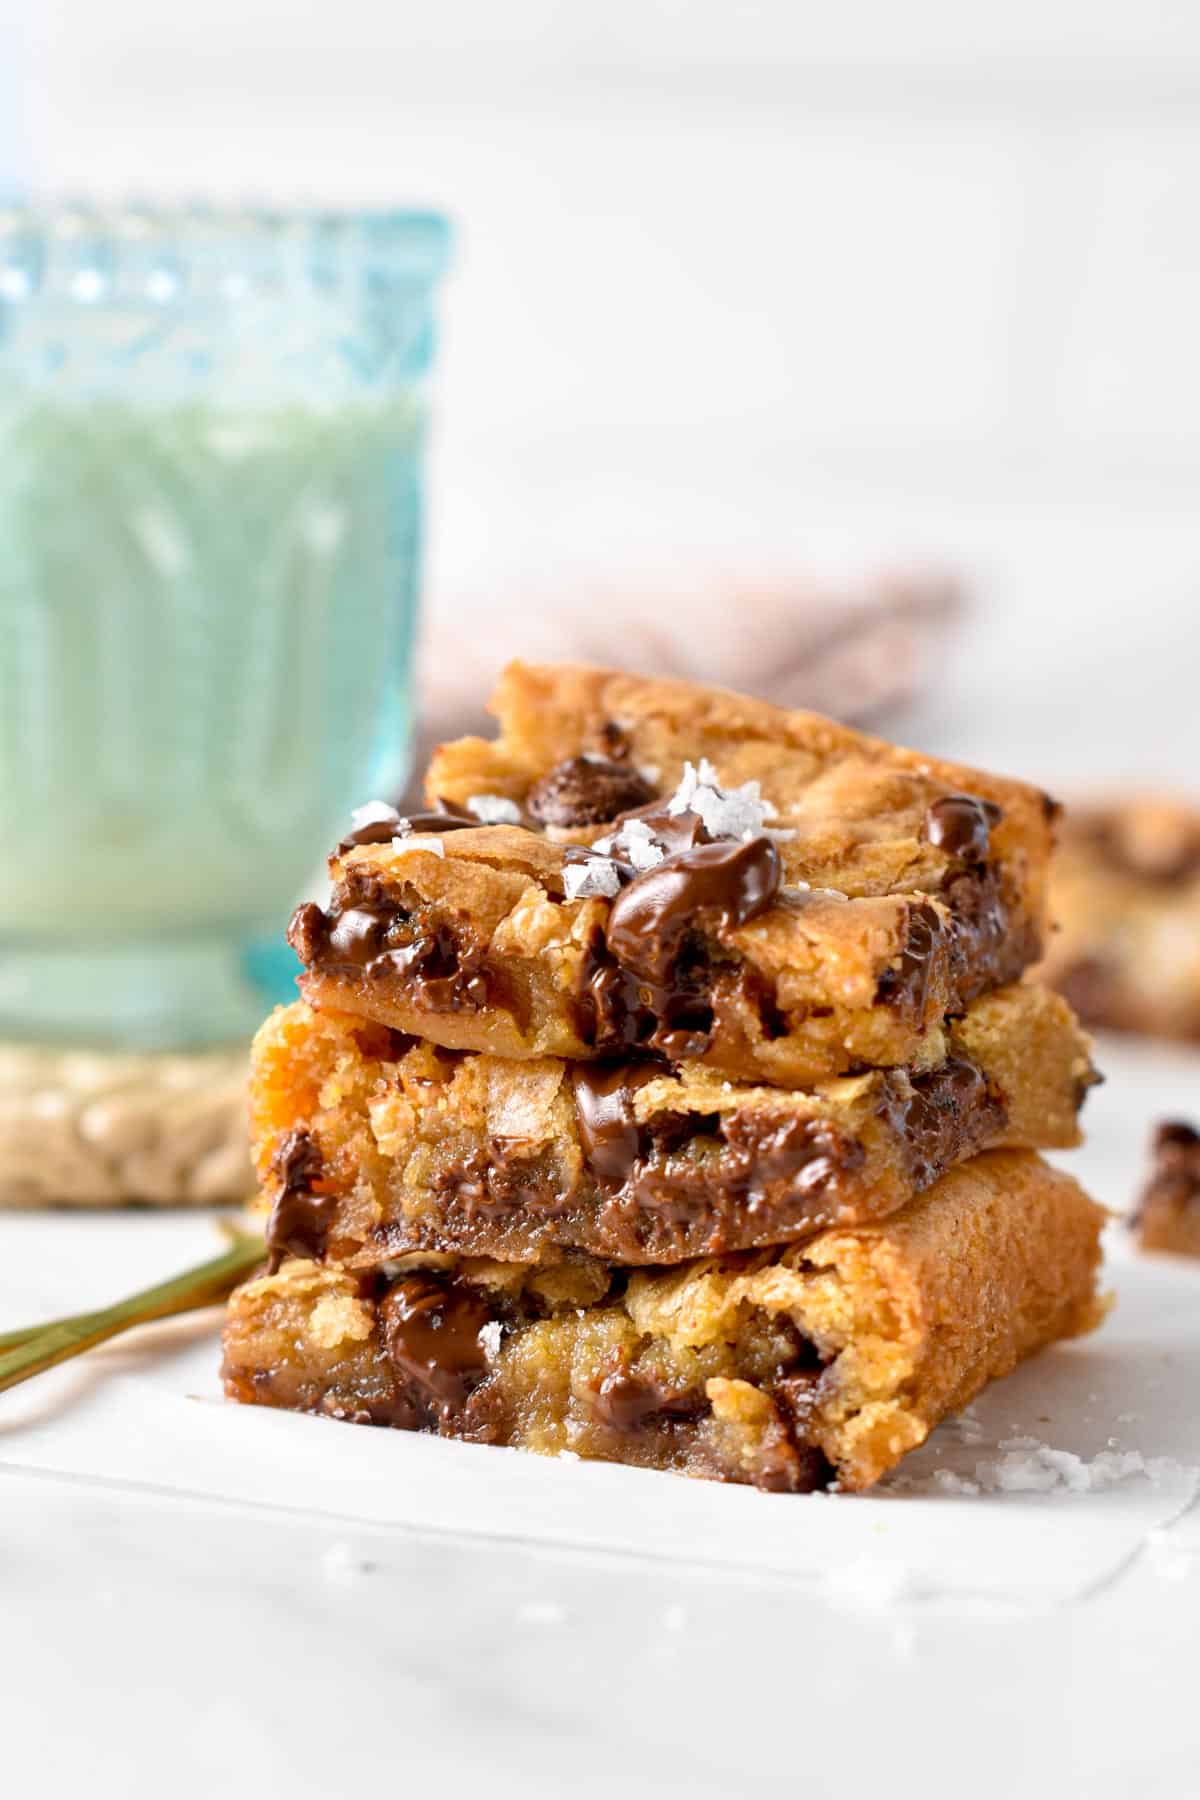 These vegan blondies are chewy, gooey vanilla bars filled with chocolate chips and crispy edges. Plus these vegan blondies are also nut-free and easy to make gluten-free if desired.